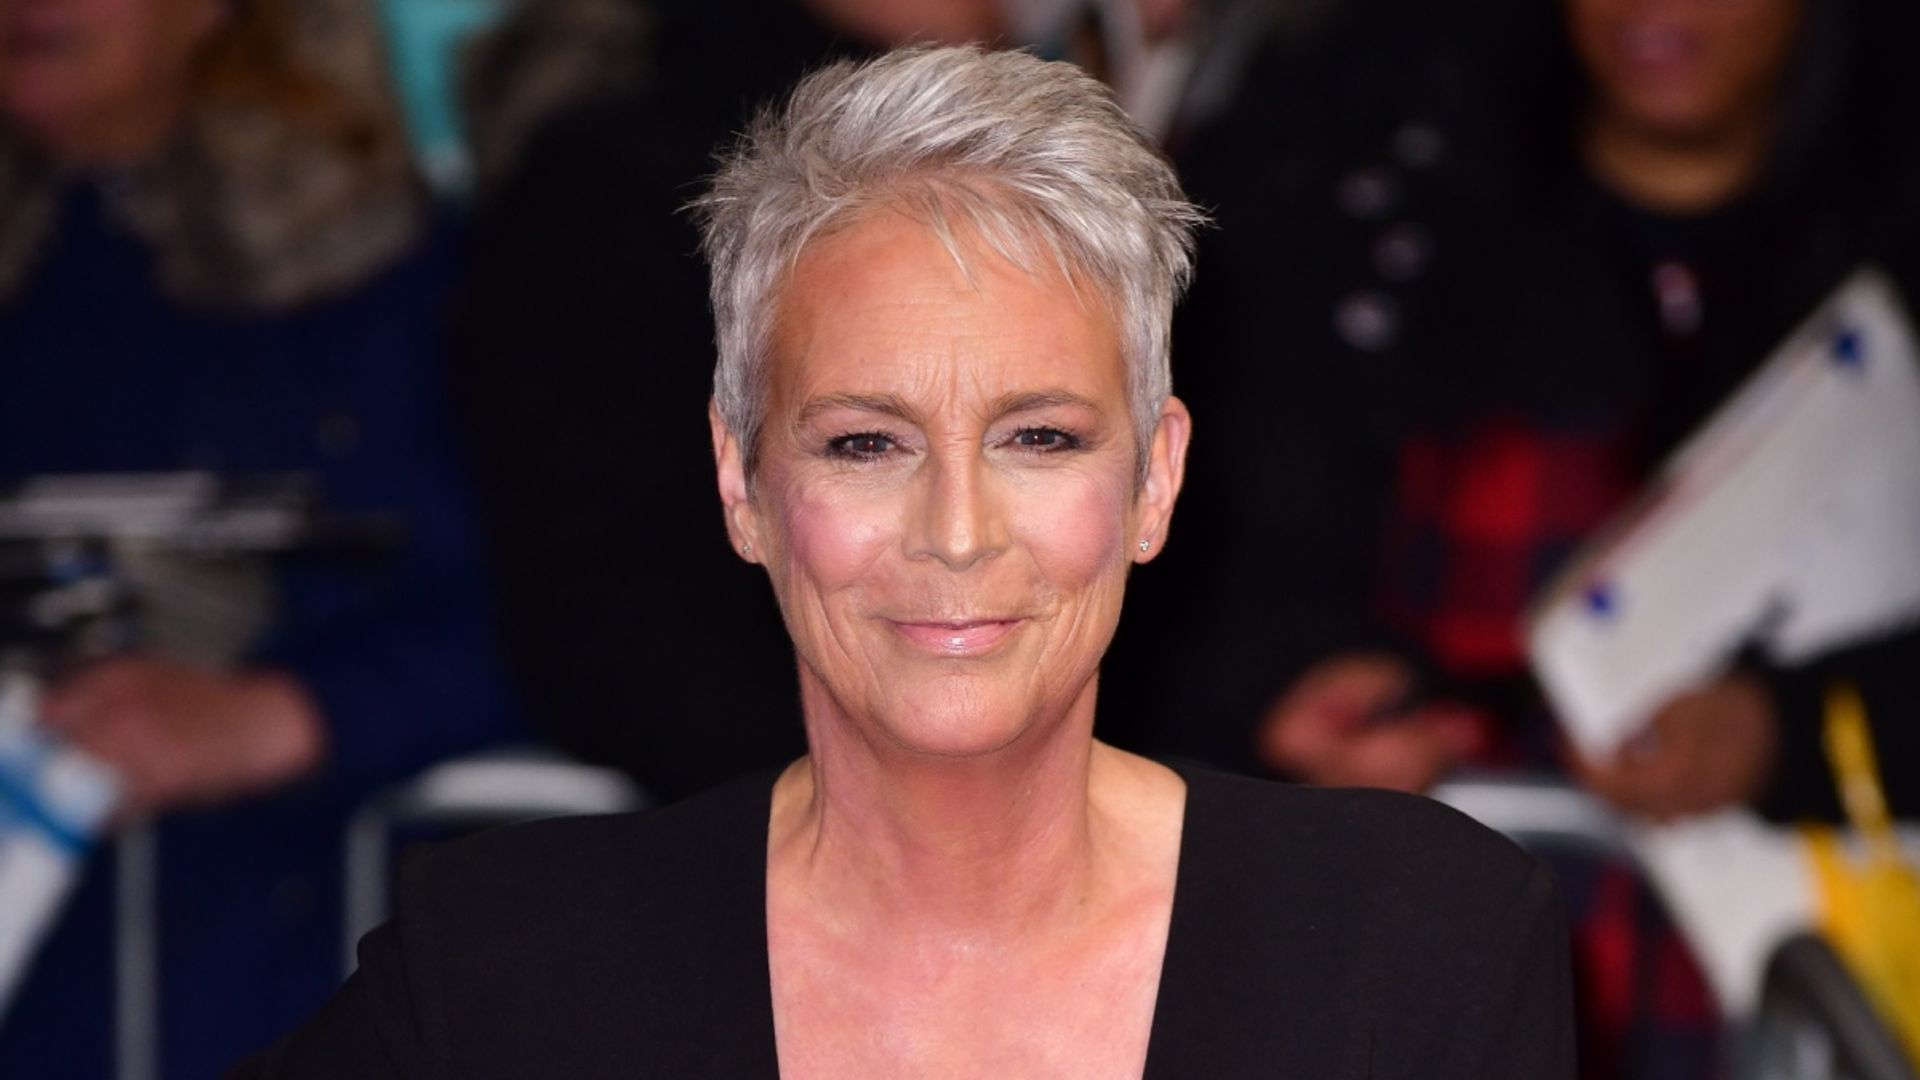 Jamie Lee Curtis hasn't aged a day as she shares epic throwback